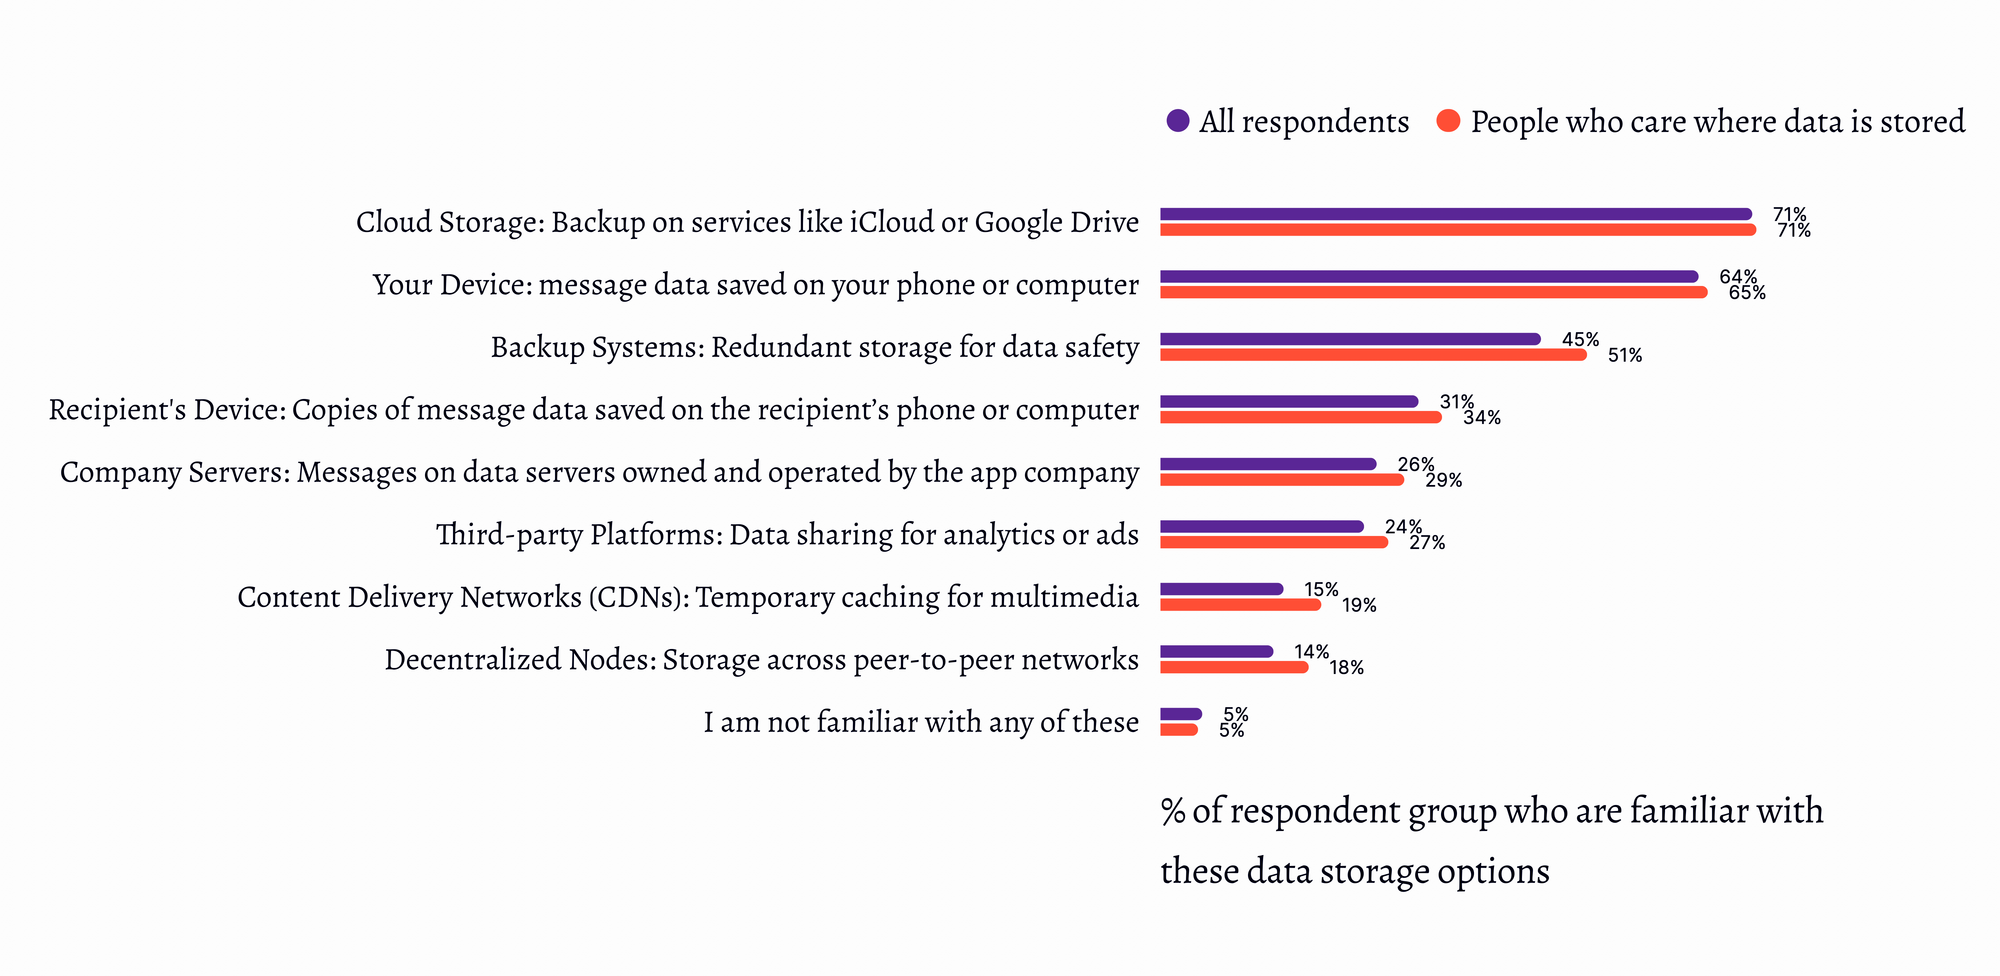 A bar chart showing participants' familiarity with different data storage options. Participants were asked to select whether or not they had heard of the following types of data storage: Cloud Storage, Your Own Device, Backup Systems, Recipients' Device, Company Servers, Third-party Platforms, Content Delivery Networks, and Decentralized Nodes.